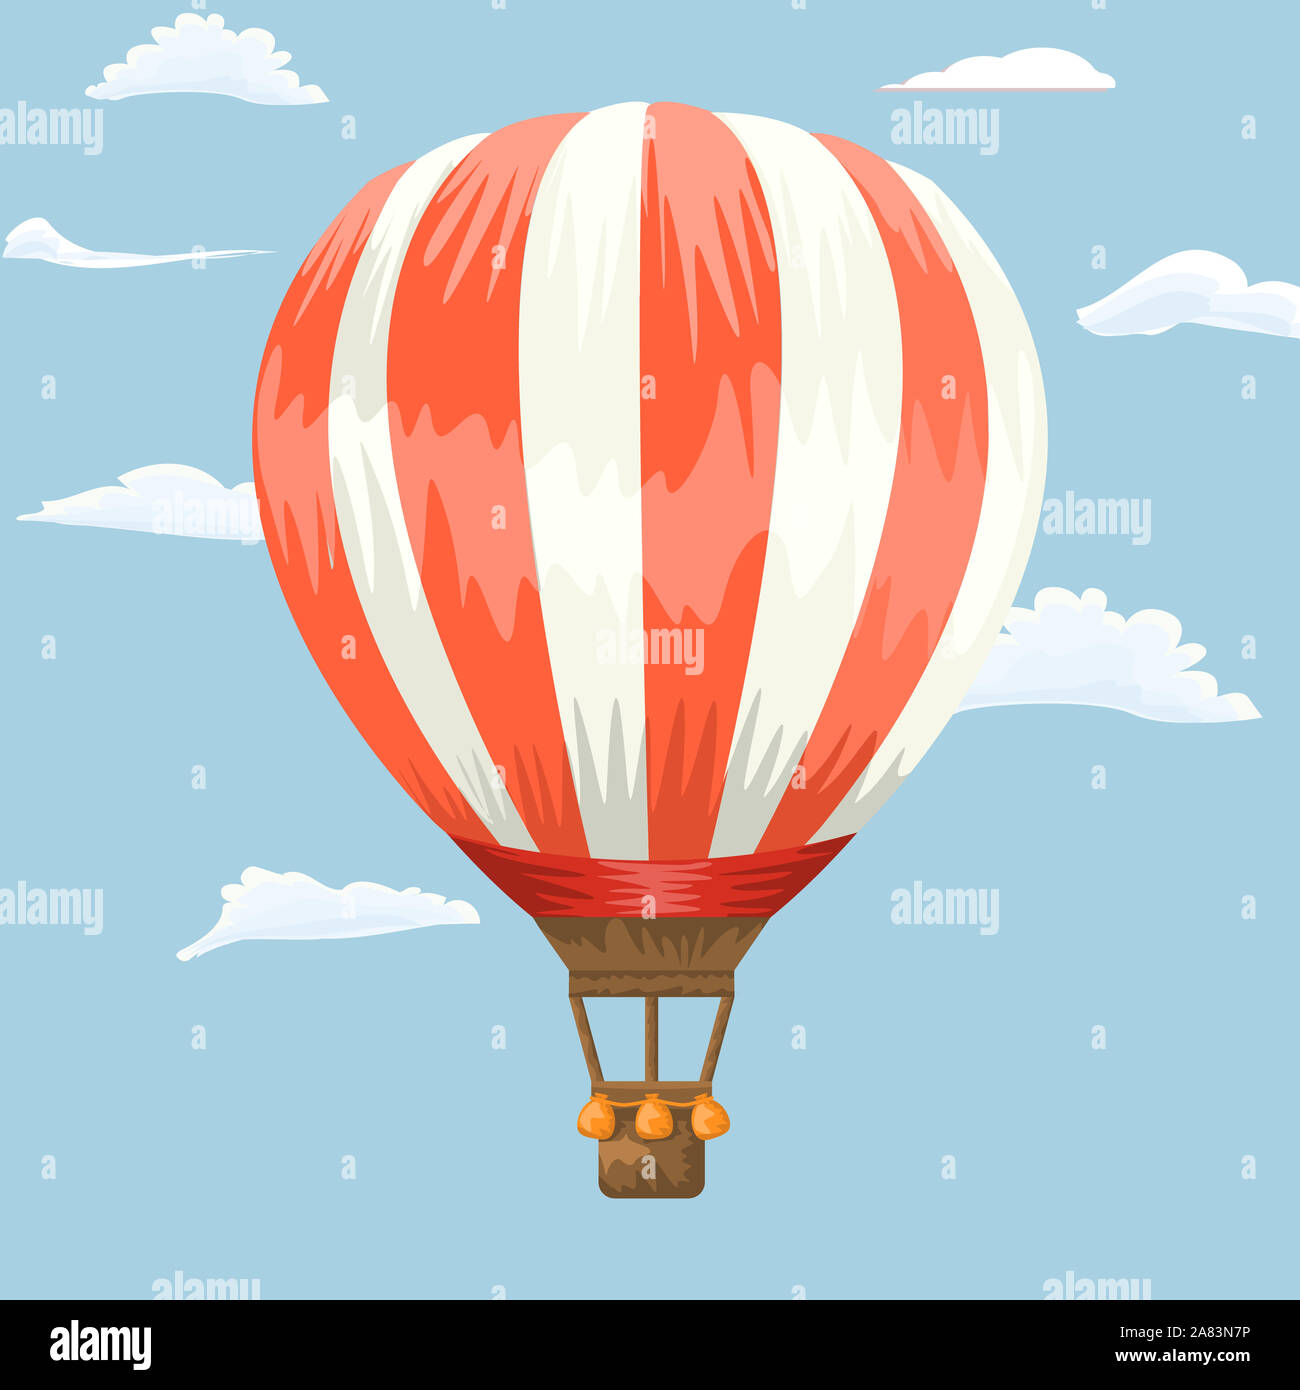 Hot air balloon flying in the sky. Cartoon and hand drawn style flat and solid color. Illustration and rasterized copy. Stock Photo